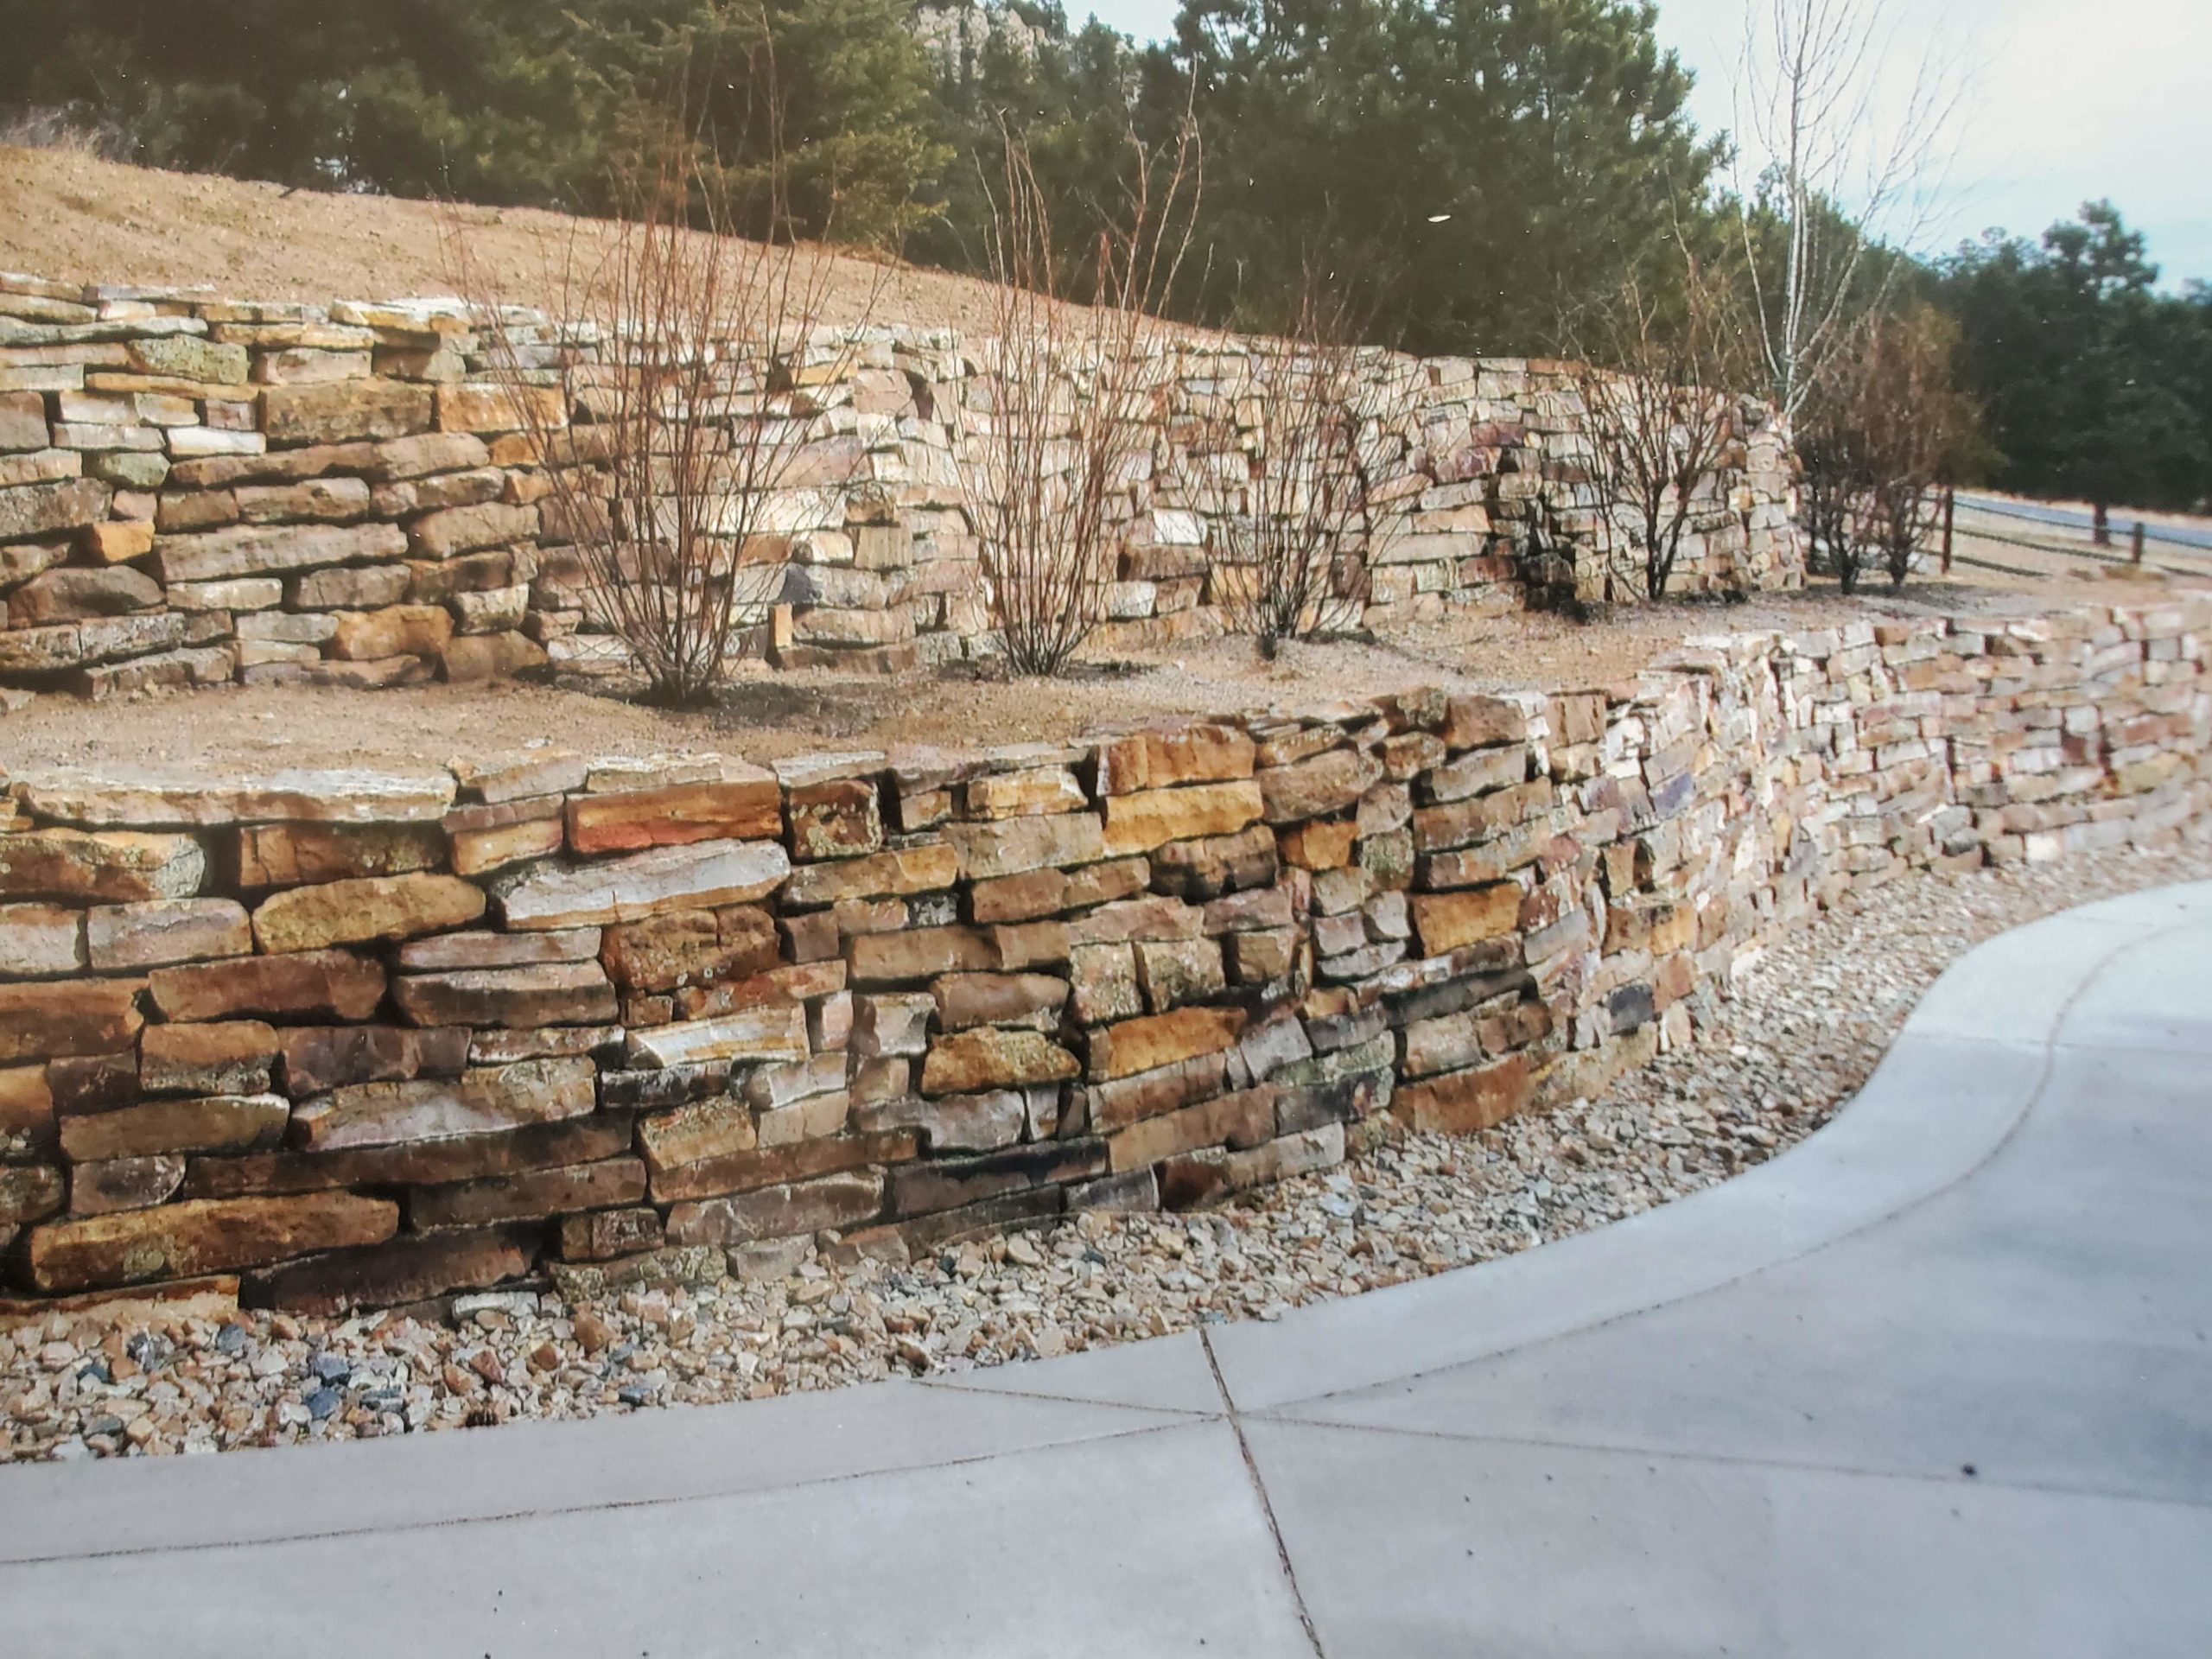 Double-terraced retaining wall with xeriscaping